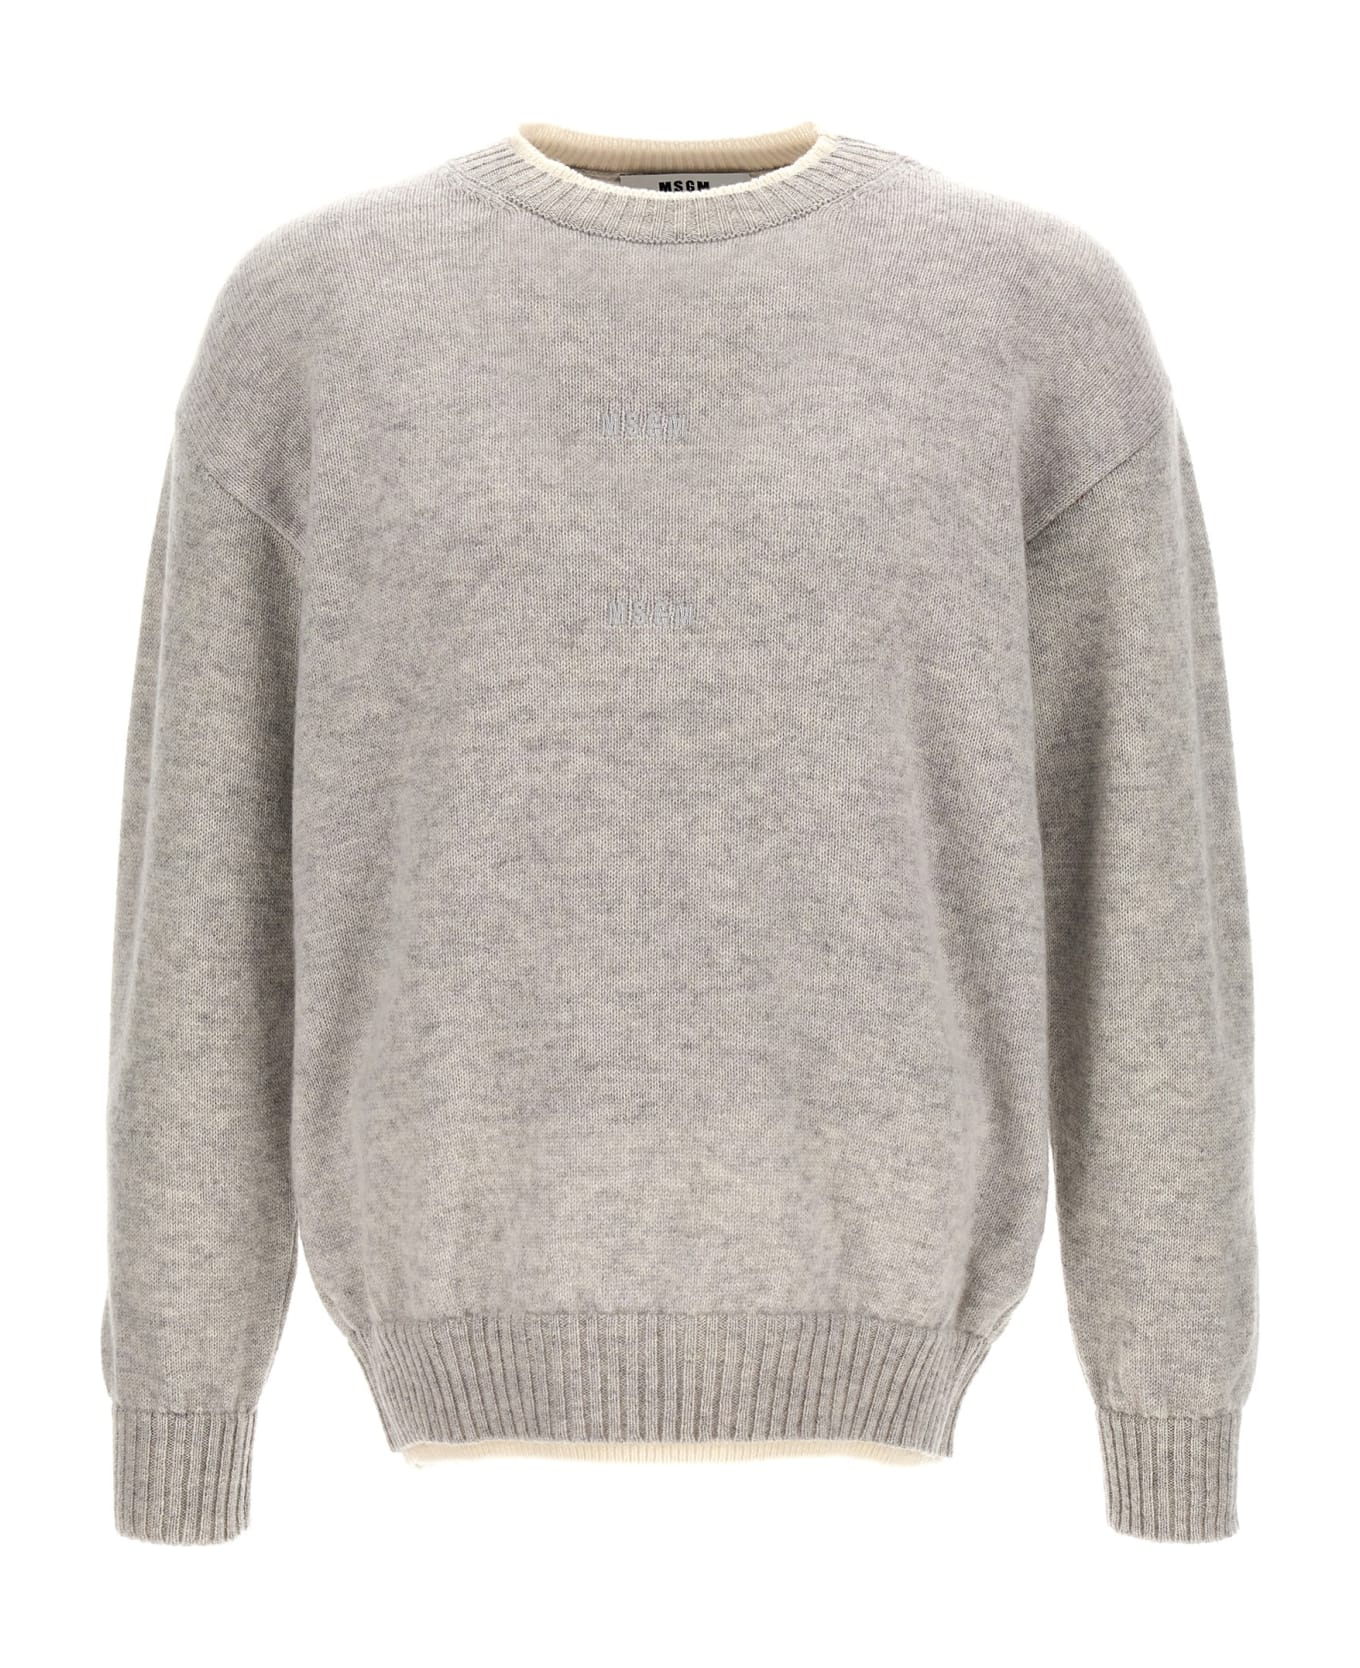 MSGM Logo Embroidery Sweater - Gray